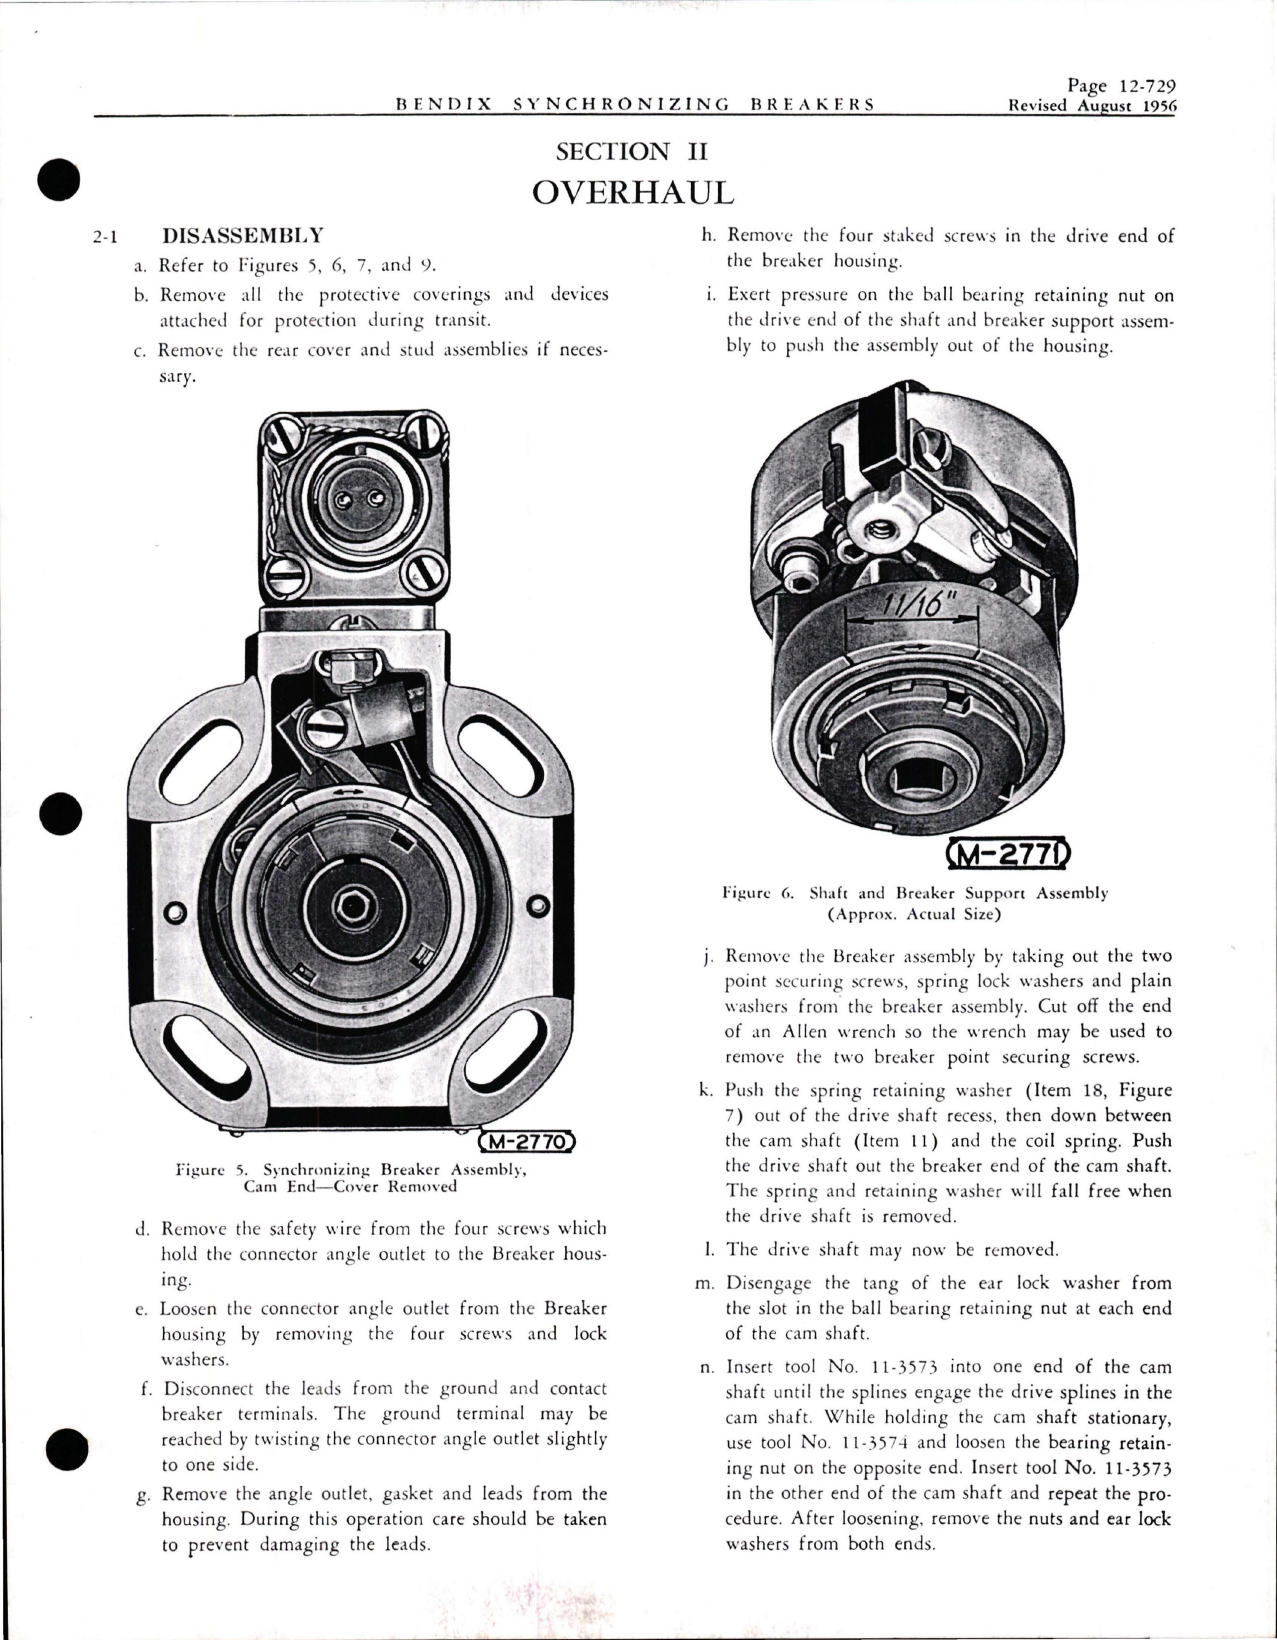 Sample page 5 from AirCorps Library document: Overhaul Instructions for Synchronizing Breaker Assembly - 10-35370-1, 10-77120-1, and 10-35330-1 thru -5